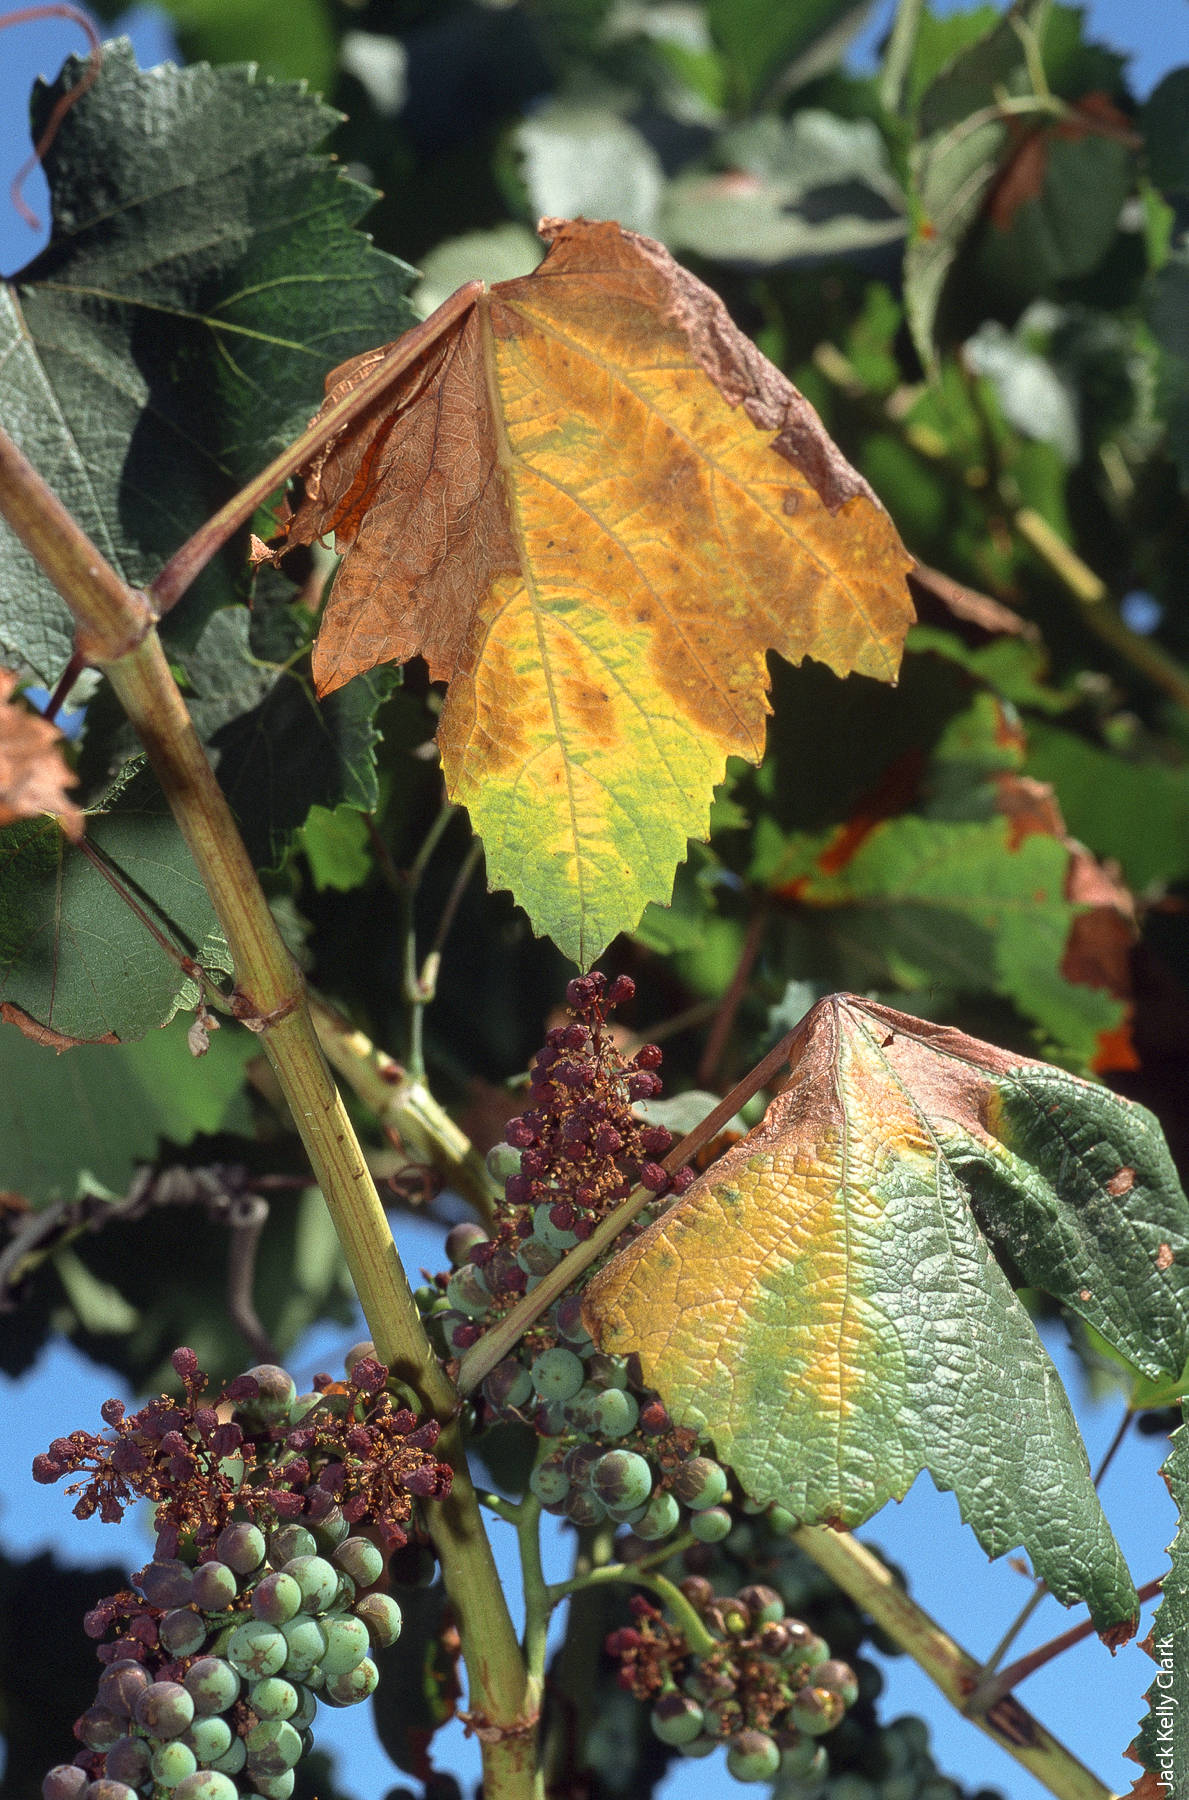 To contain the spread of PD, the California Department of Food and Agriculture placed a quarantine on the movement of plant material from GWSS-infested areas to GWSS-free areas within California. Above, discoloration of grape foliage caused by PD and sunburn on fruit in a Sonoma County vineyard.